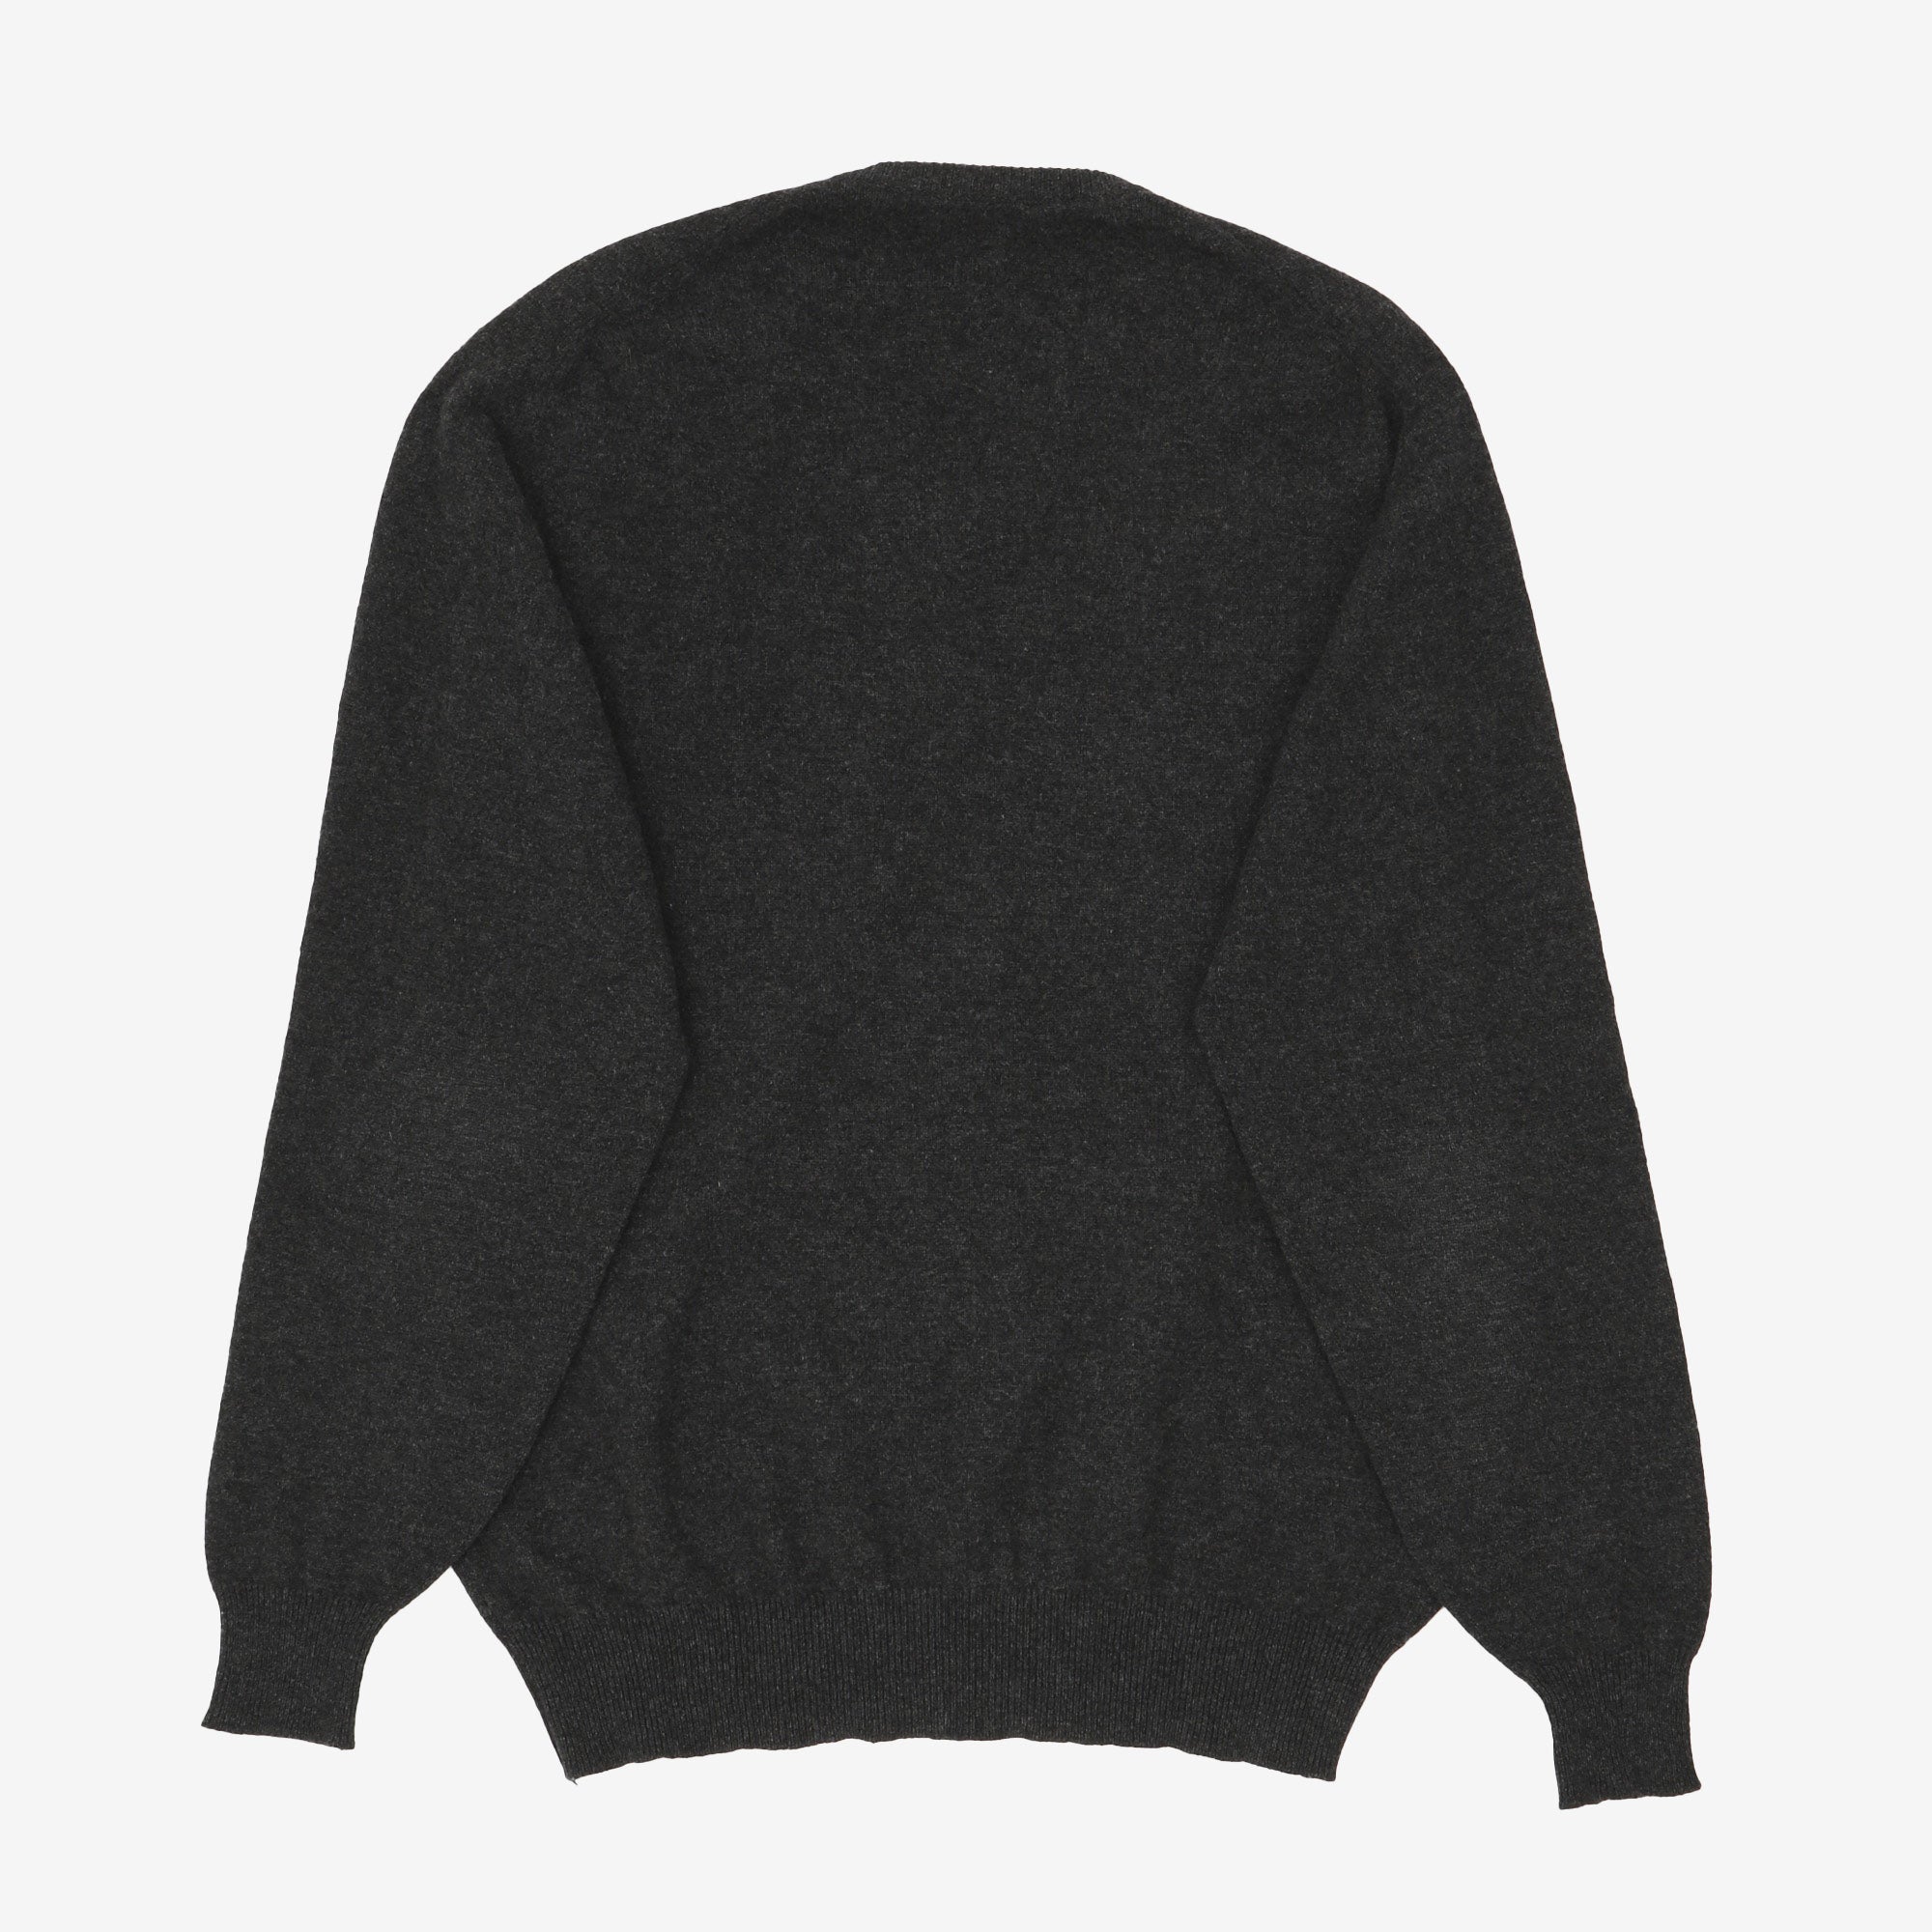 V-Neck Lambswool Sweater